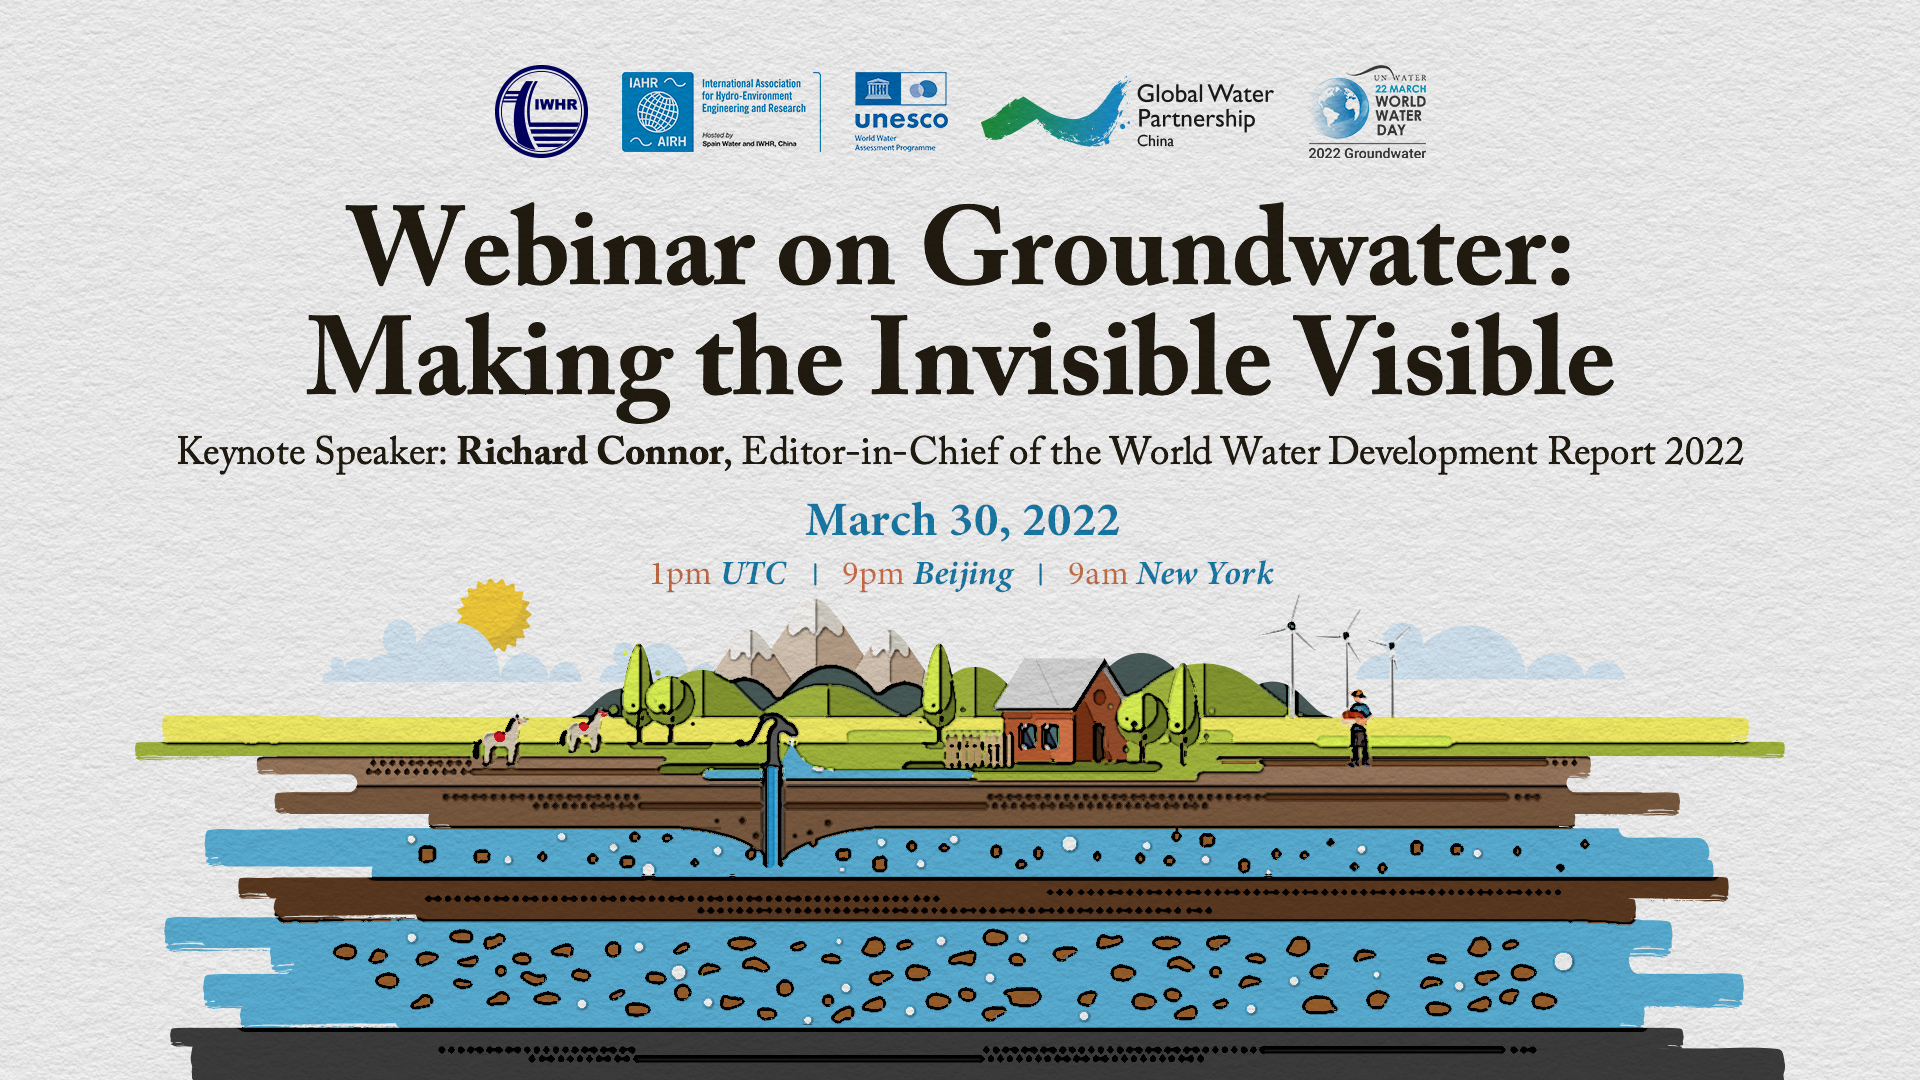 Webinar-on-How-to-Make-the-Invisible-Groundwater-Visible1920-1080.jpg